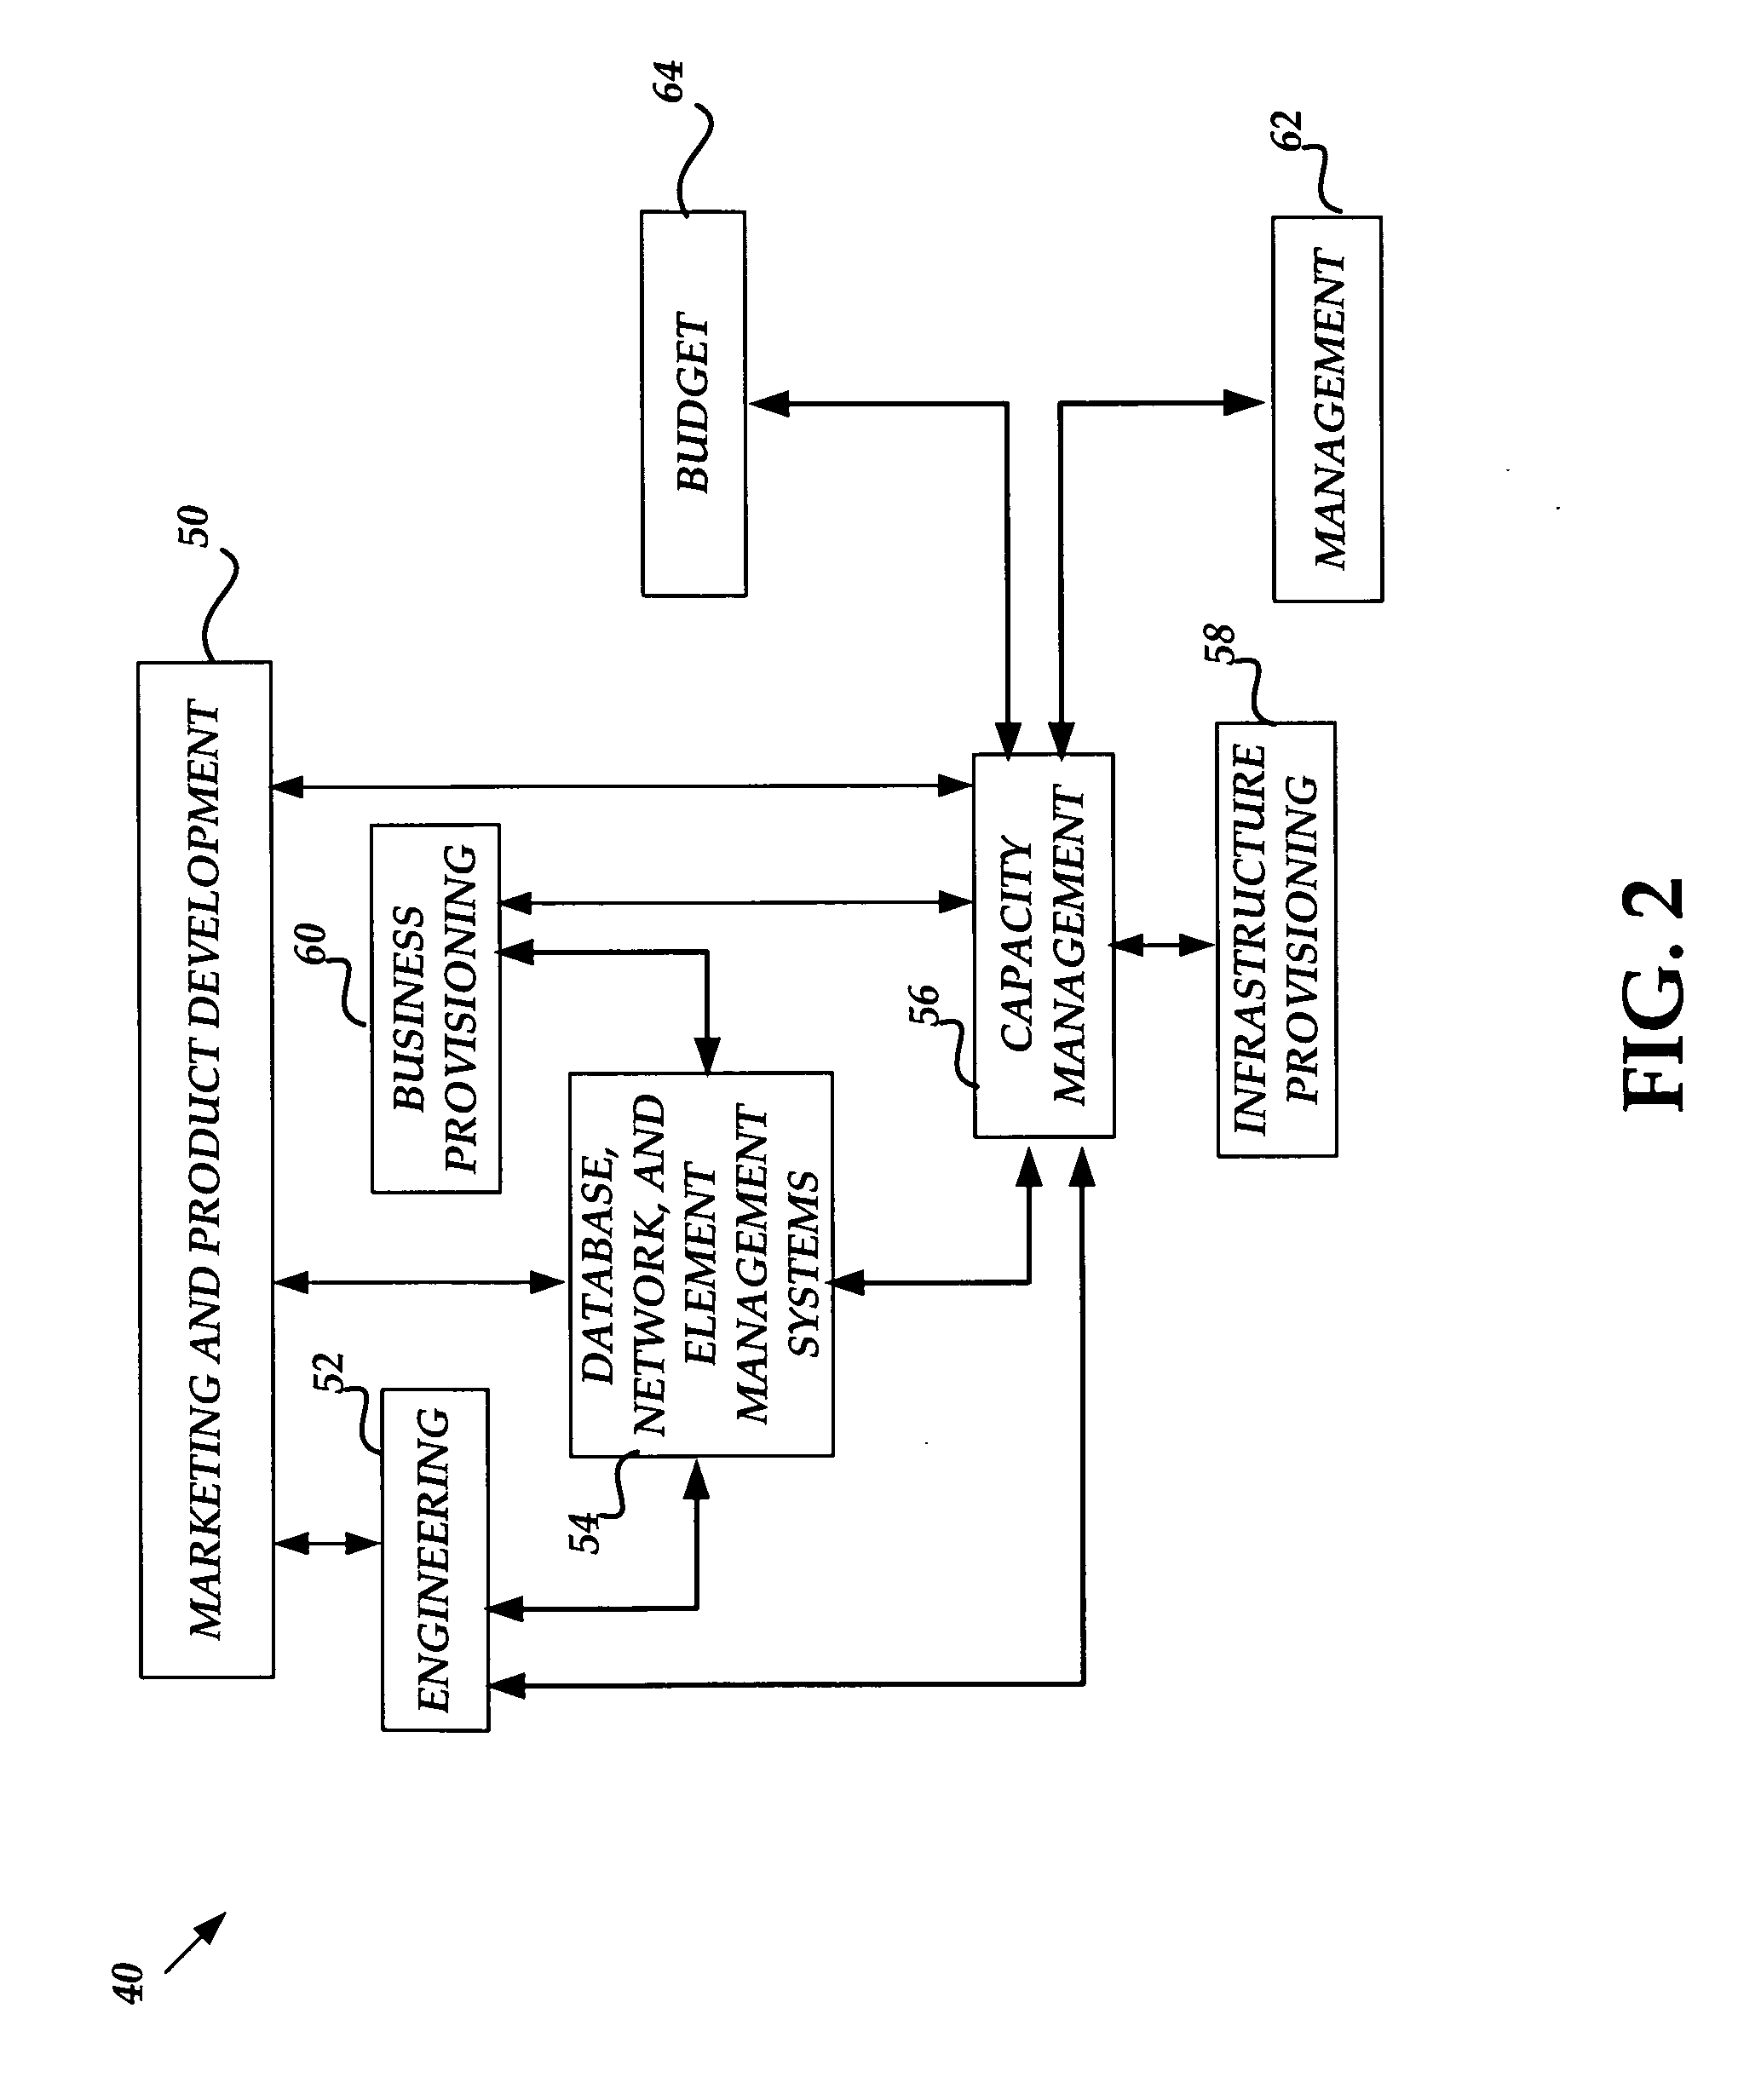 Methods and systems for developing a capacity management plan for implementing a network service in a data network